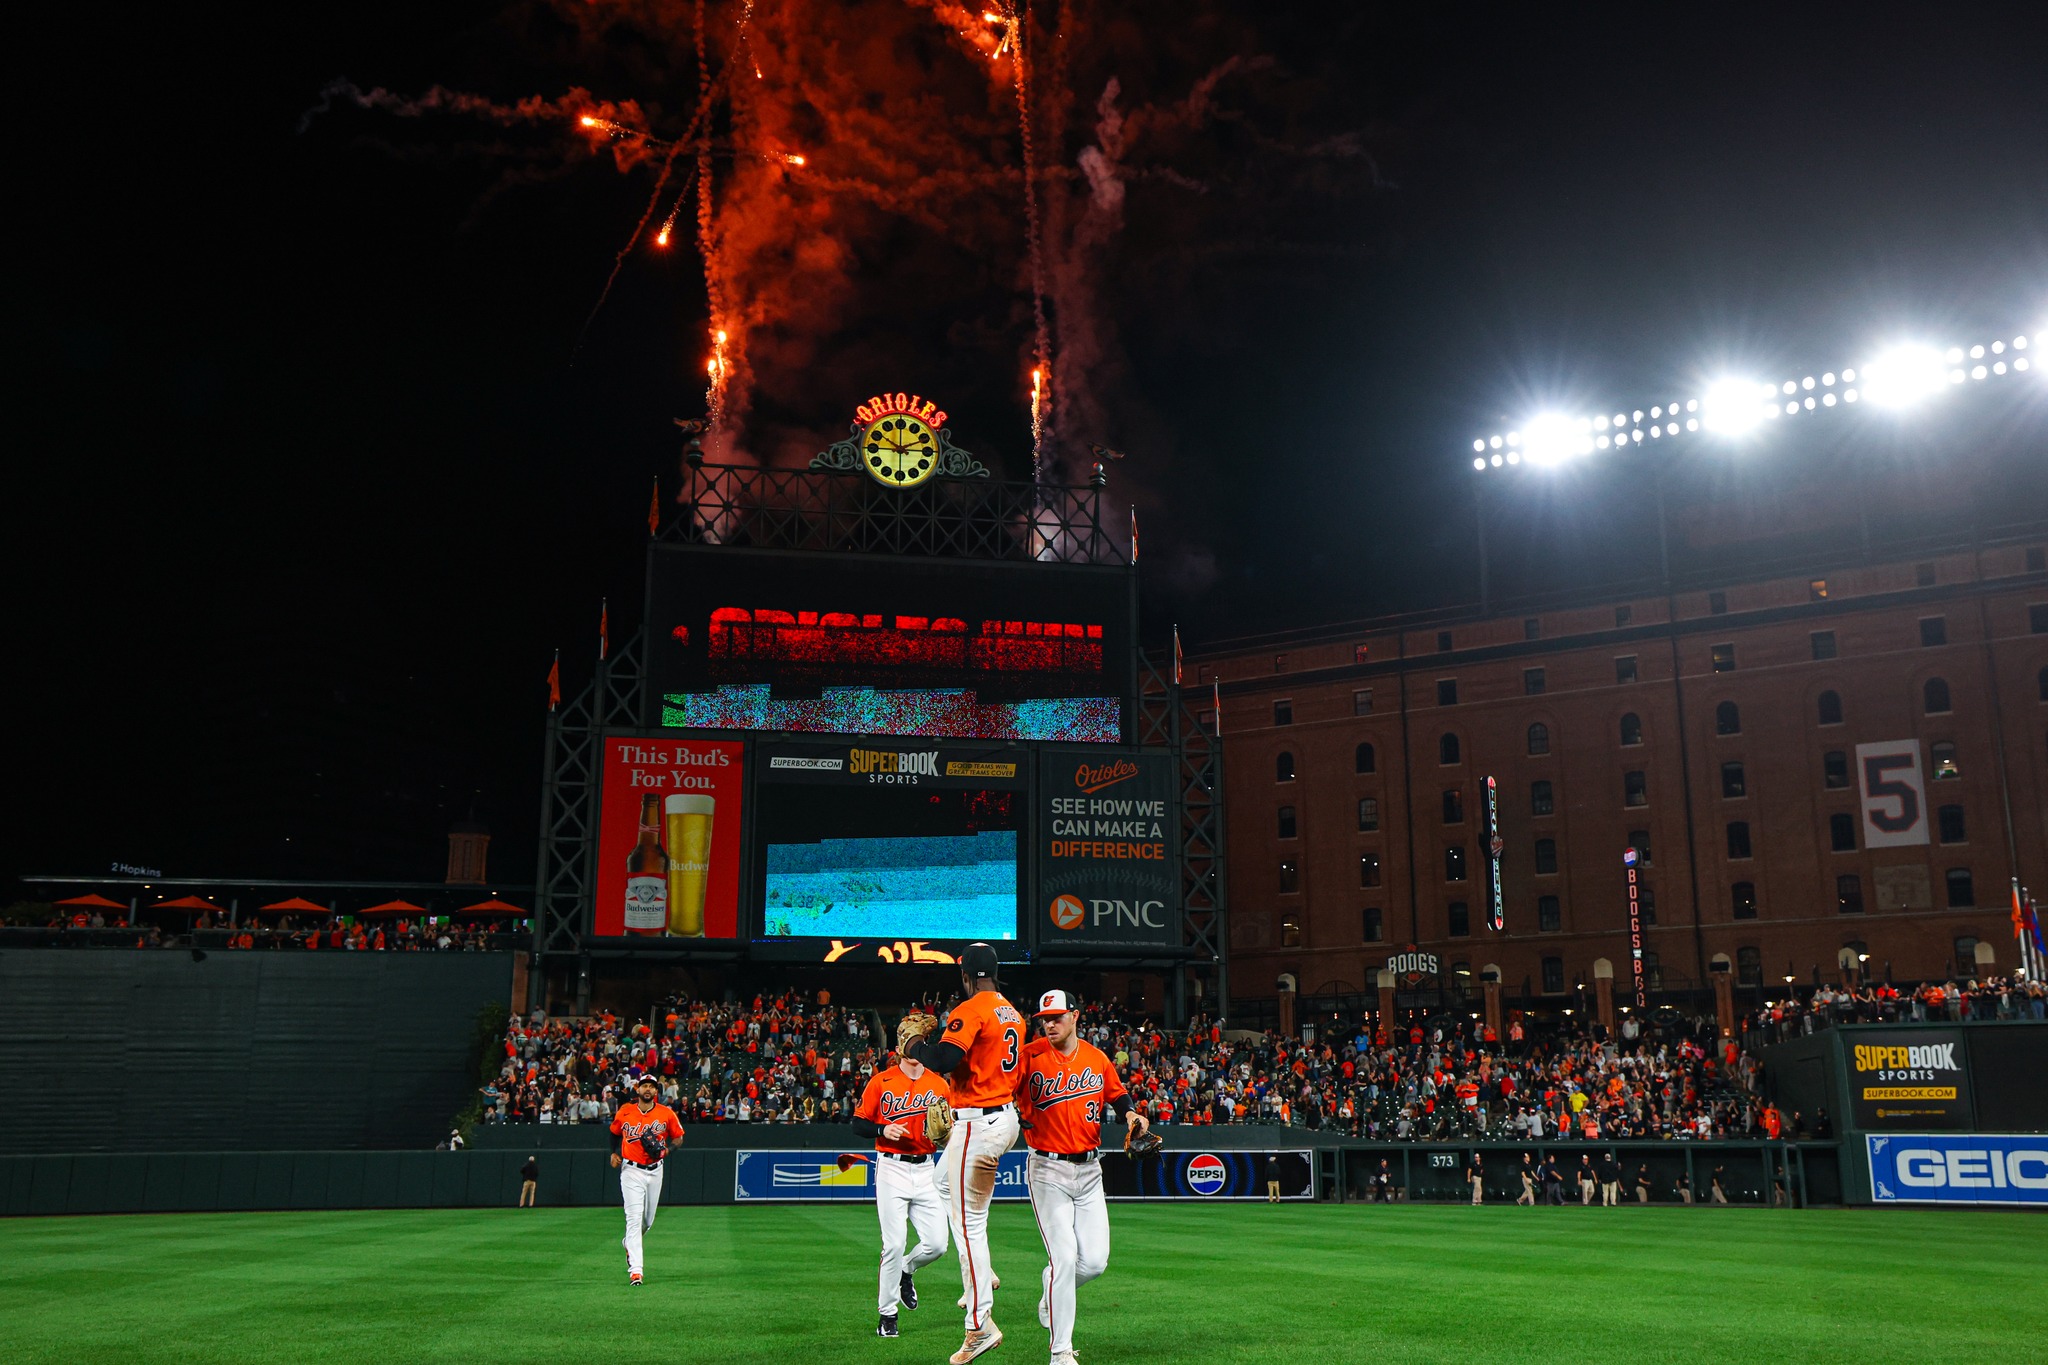 Baltimore Orioles - Happy Maryland Day to all in #Birdland!